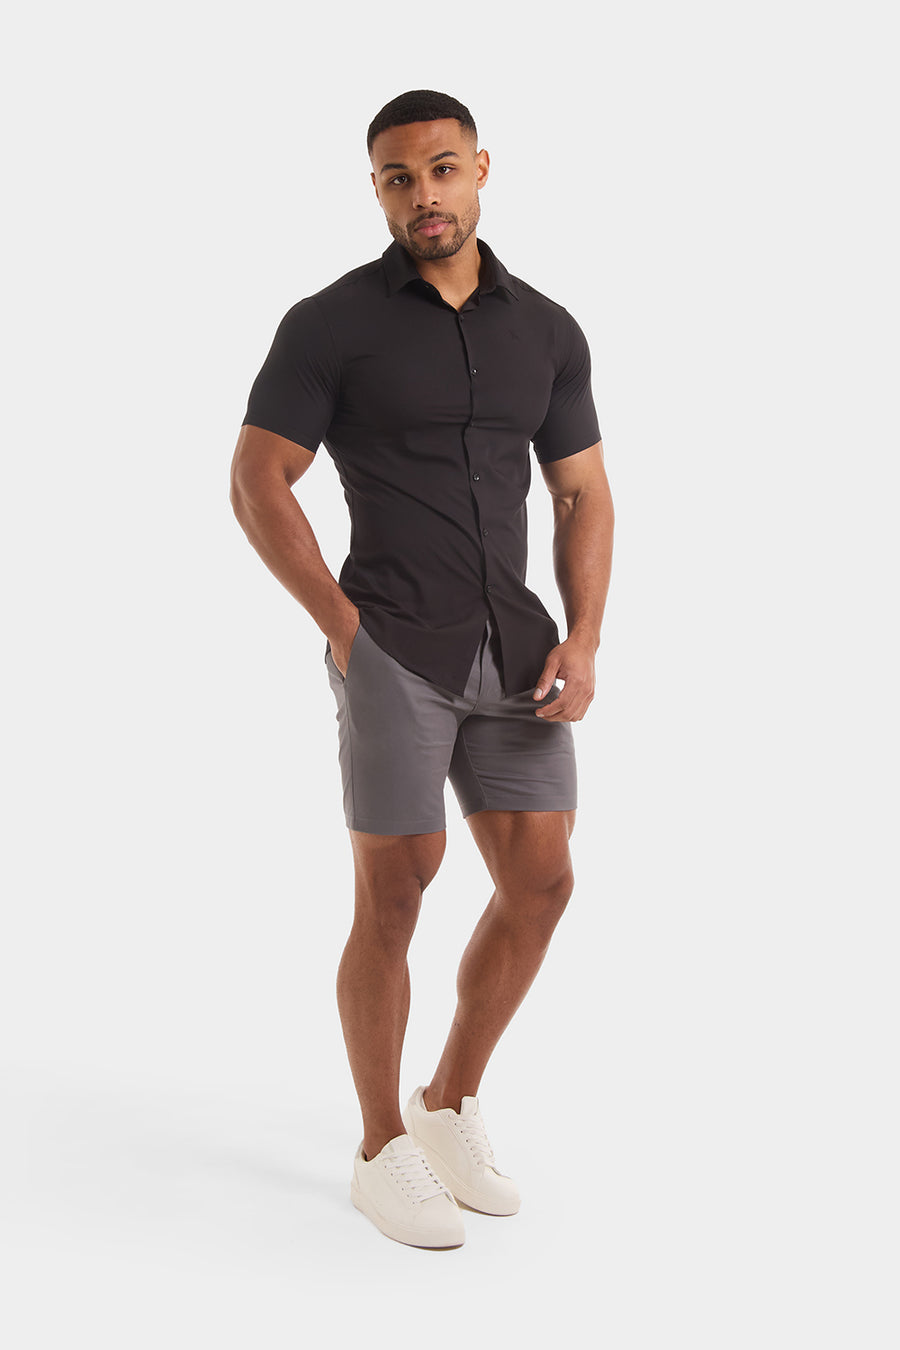 Athletic Fit Chino Shorts 7" in Dark Grey - TAILORED ATHLETE - USA